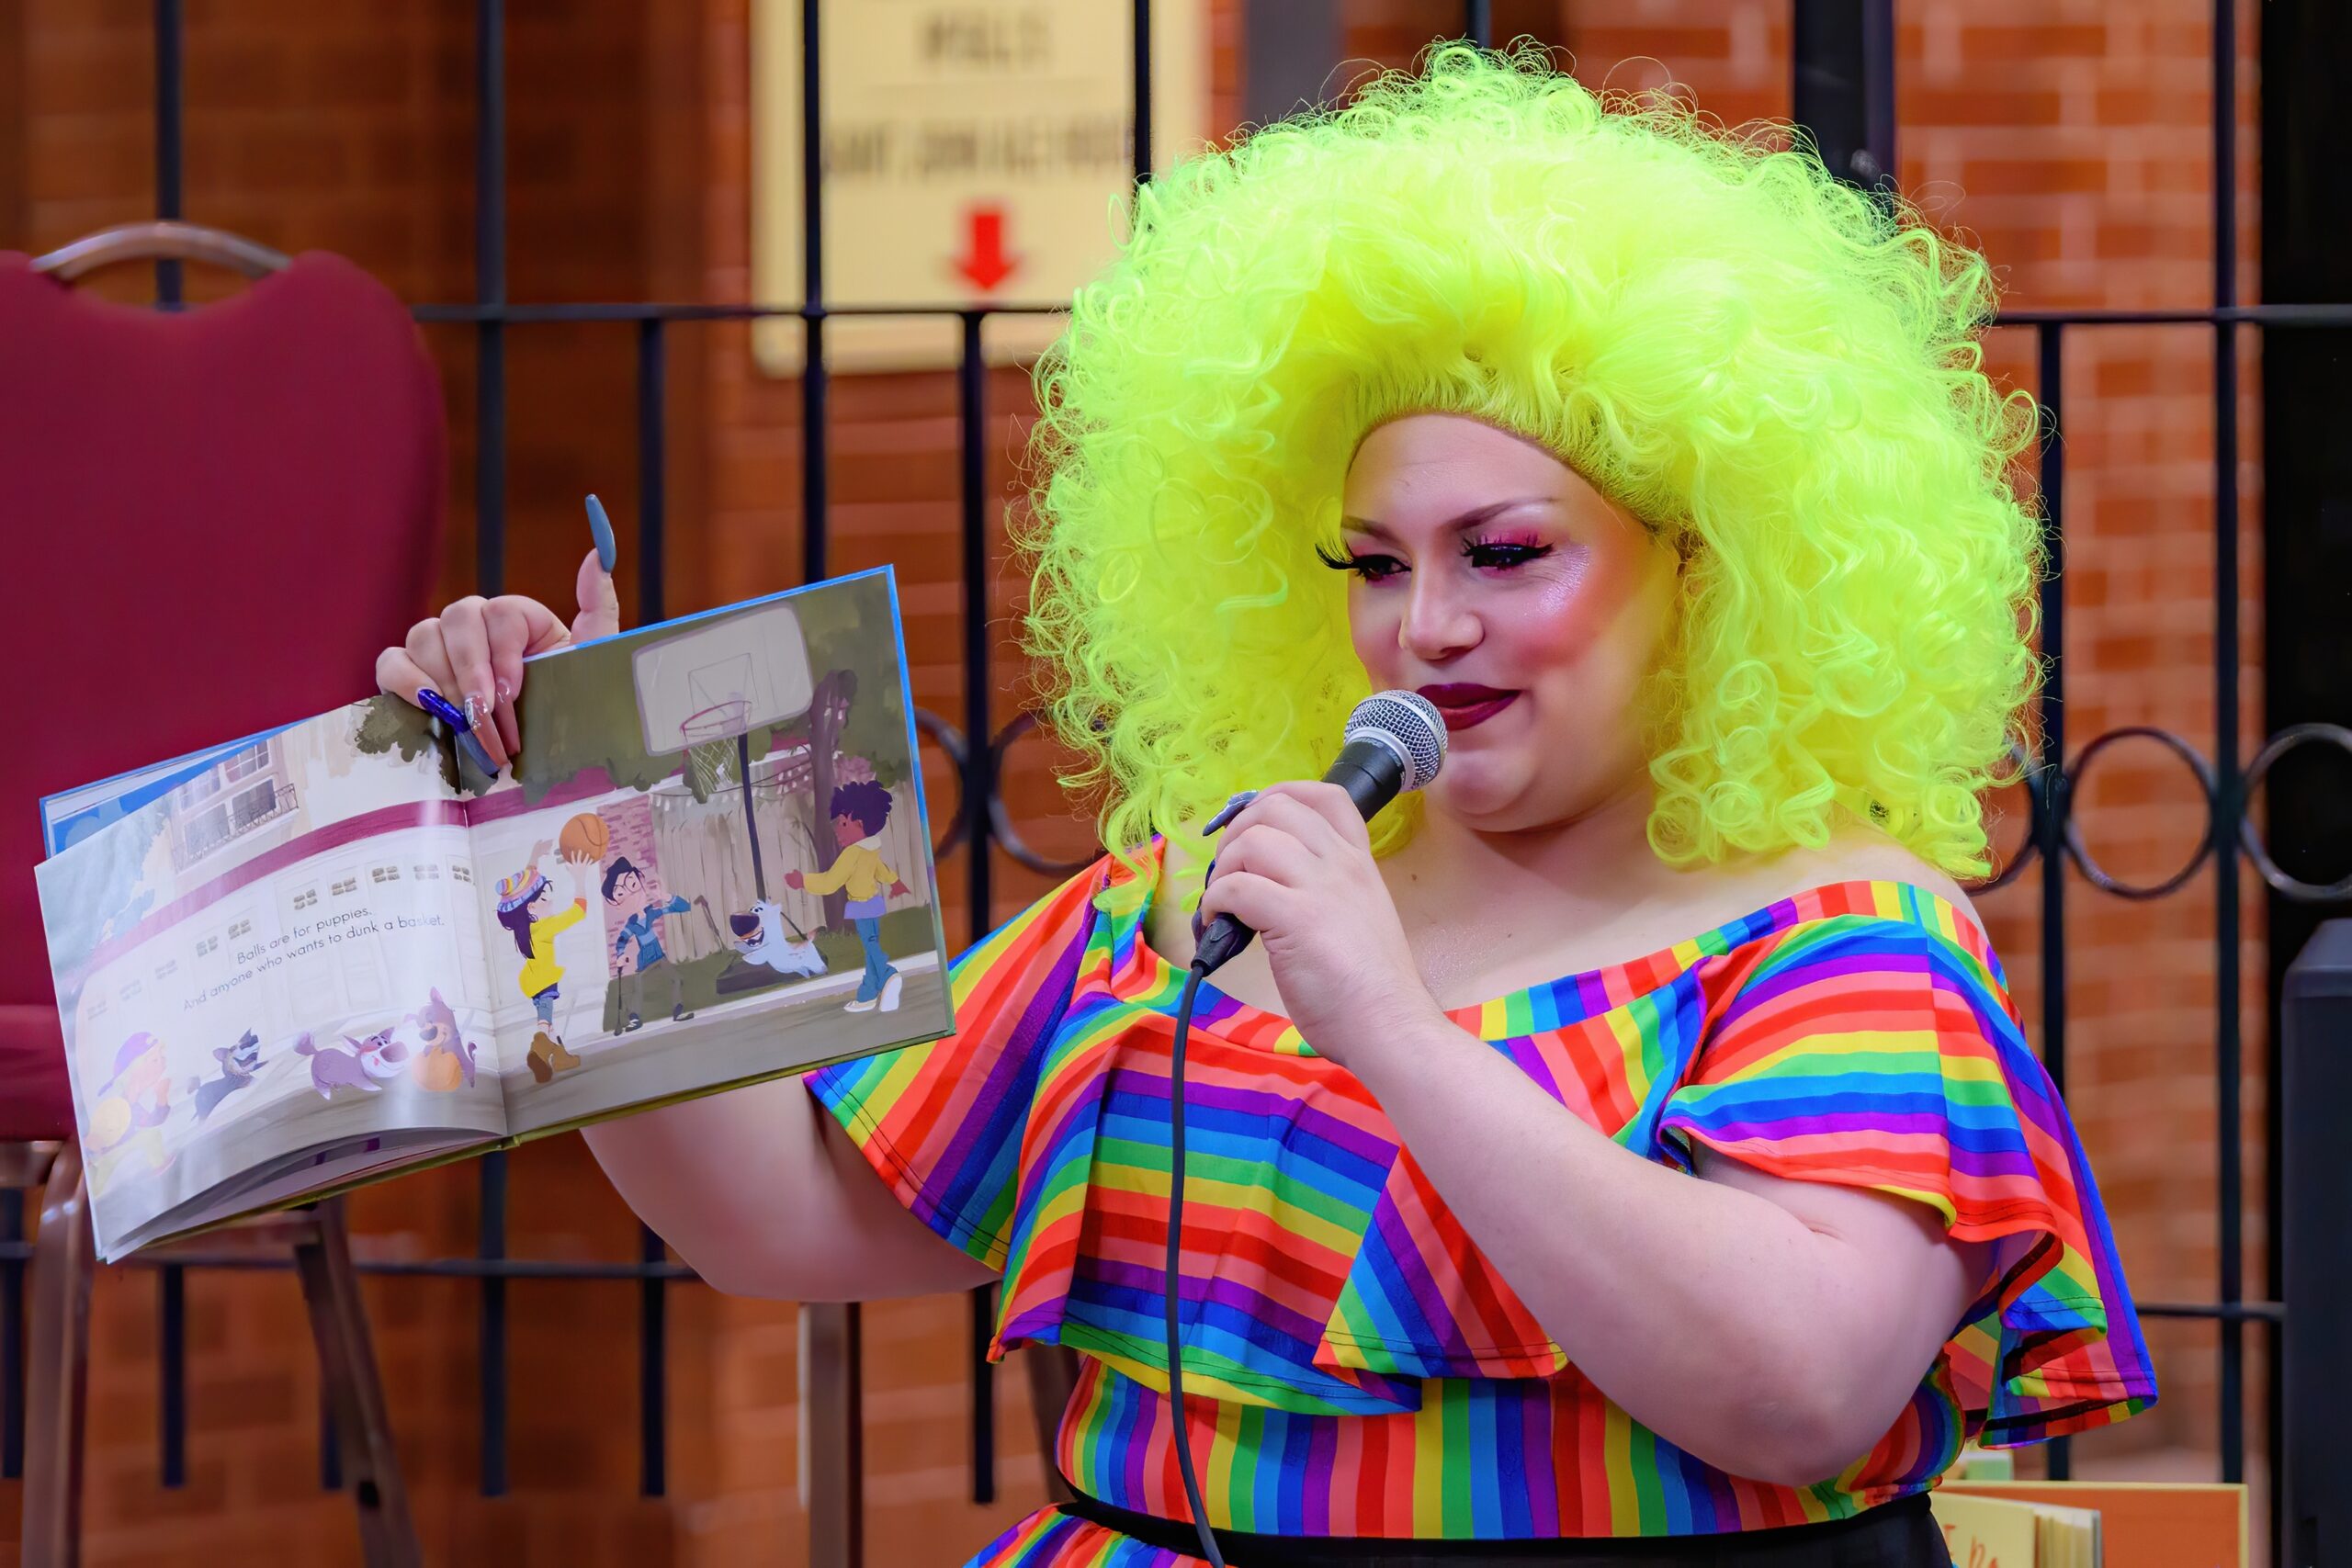 Drag queen story hour disrupted by possible hate crime